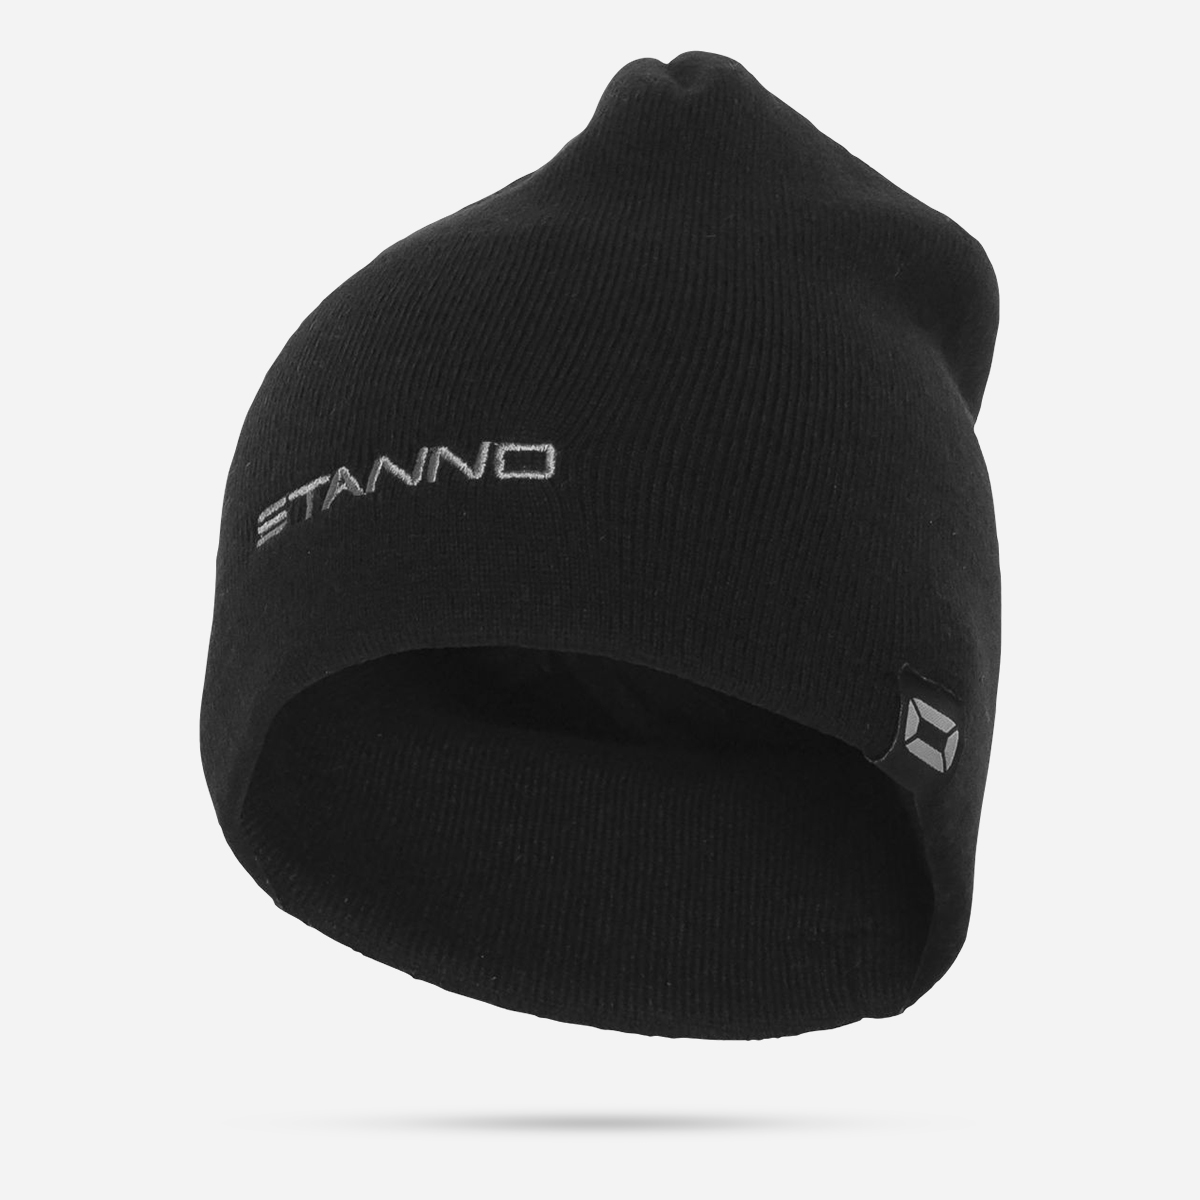 AN305202 Stanno Training Hat